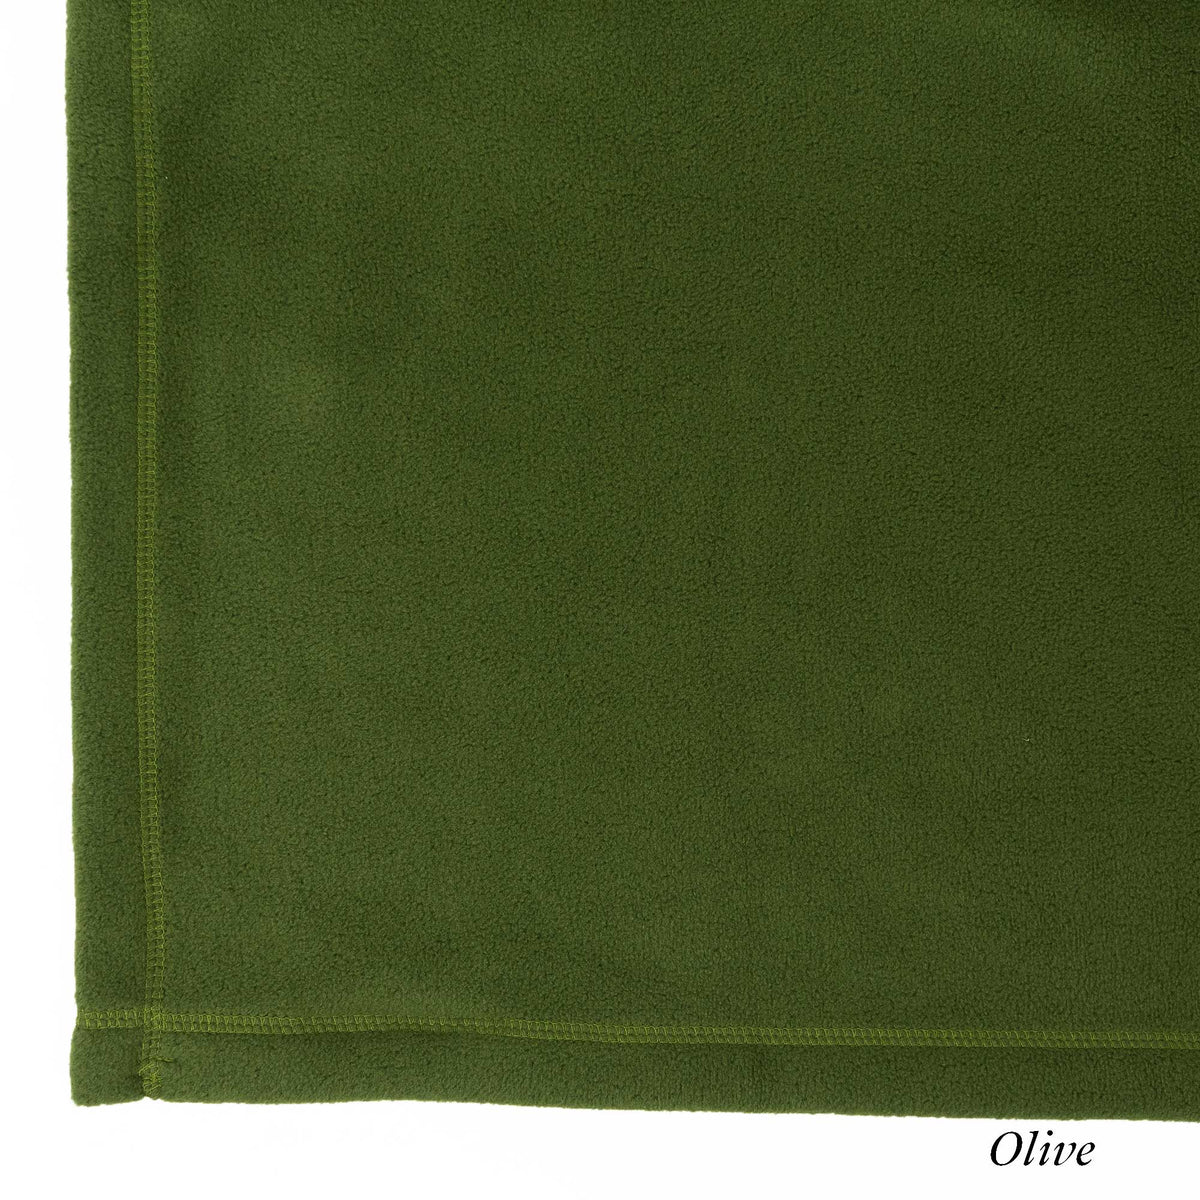 Olive - Big Ricky&#39;s Microfiber Cleaning Cloths - Micro Fiber Cleaning Cloths - American Blanket Company